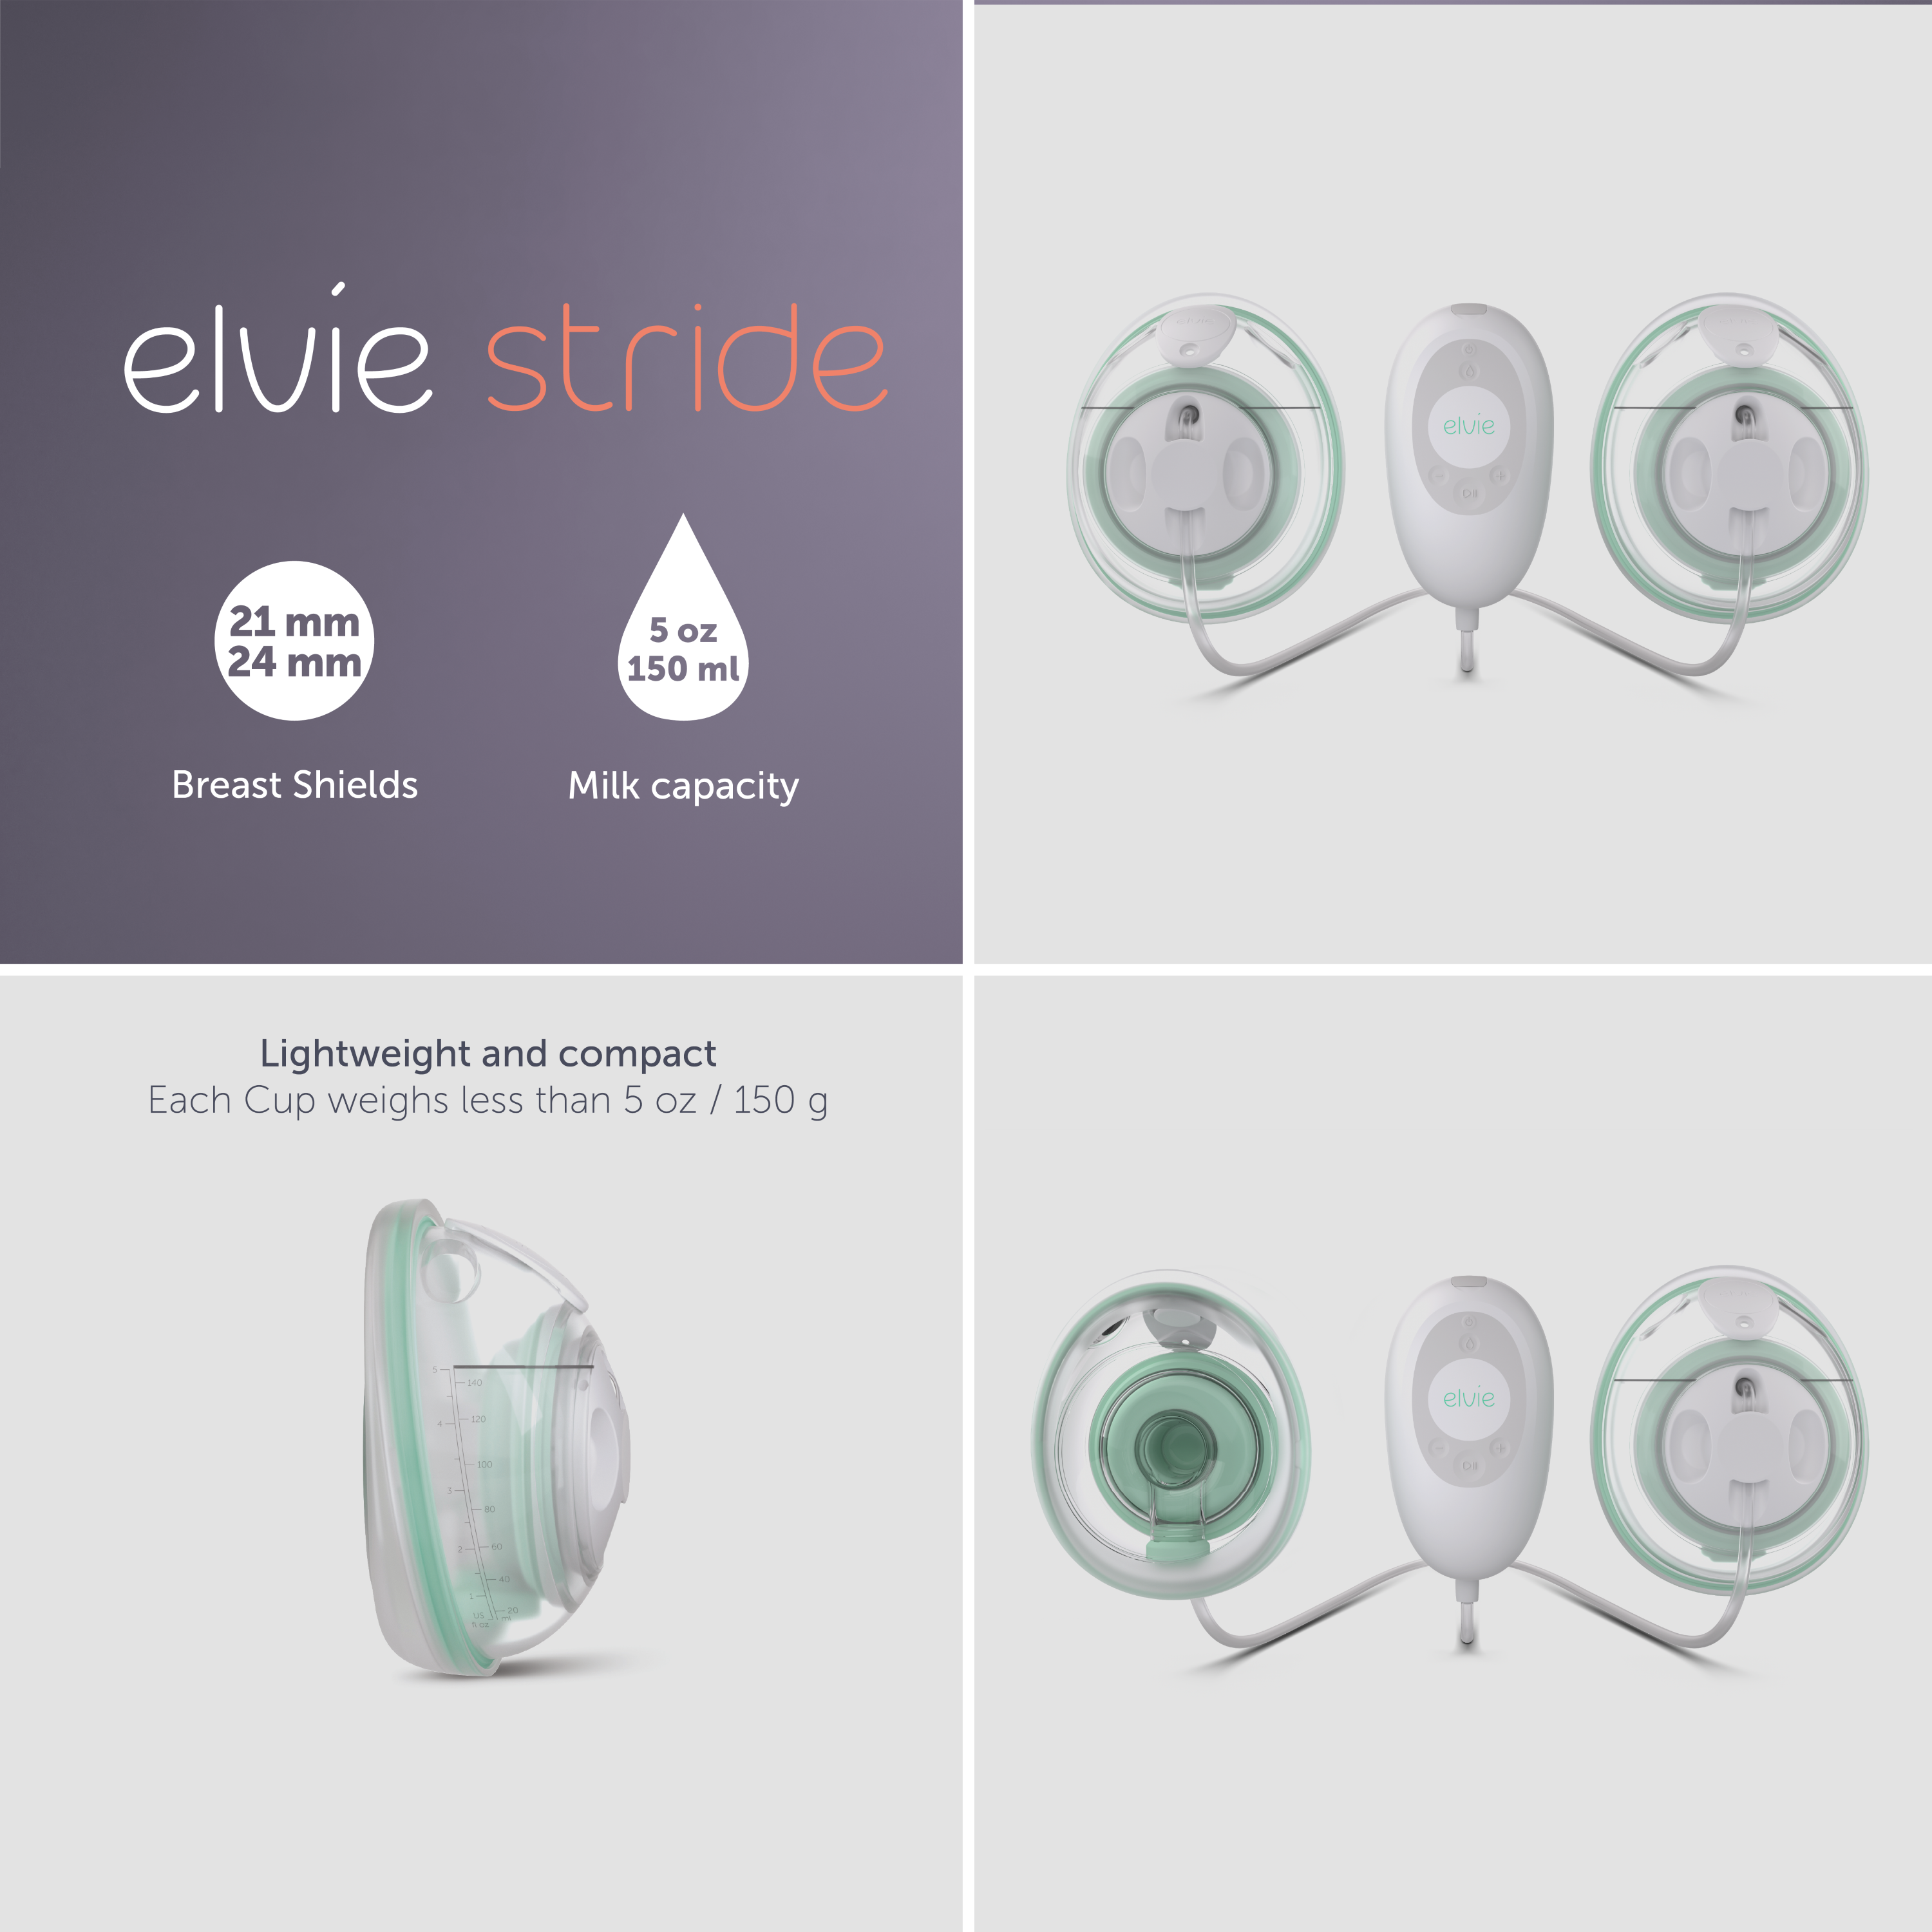 elvie stride double breast pump milk capacity and three breast shields size